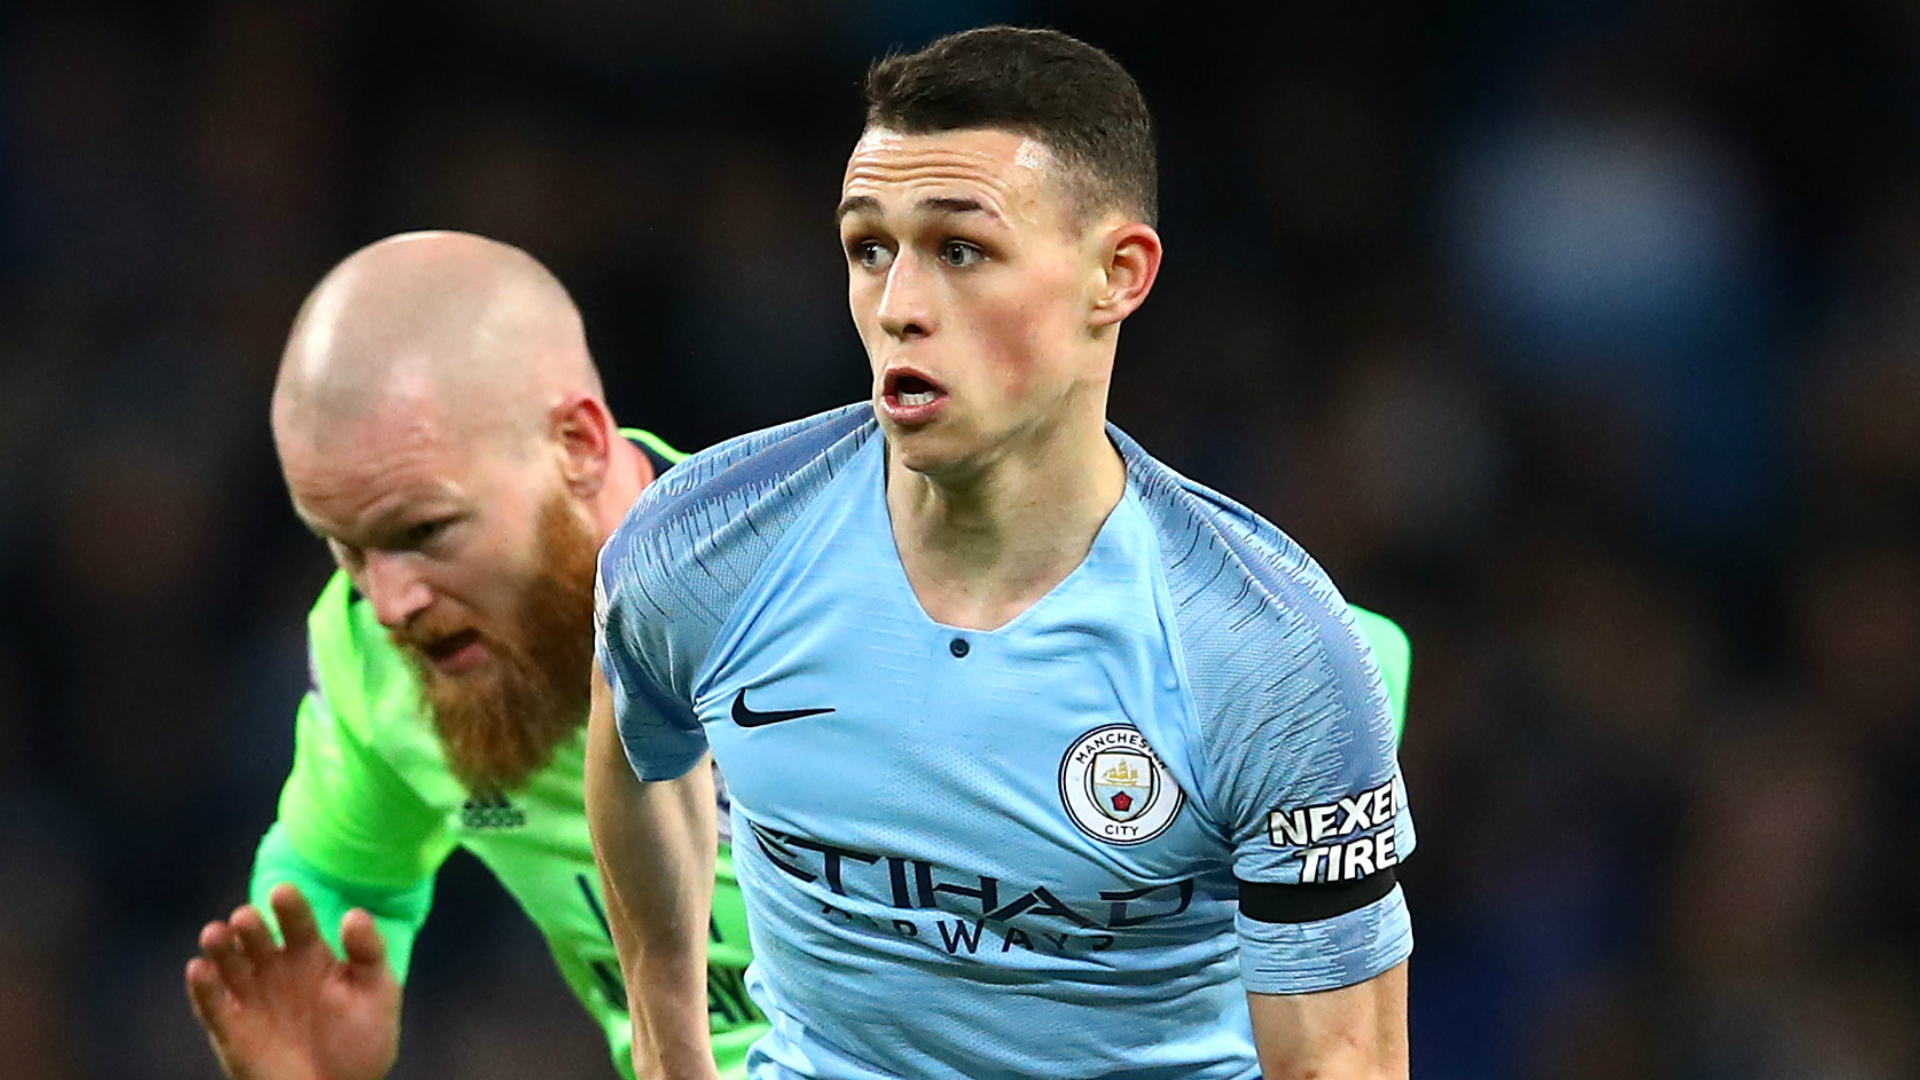 Manchester City host Tottenham for the second time this week on Saturday, with Phil Foden coming into the team for a rare league start.